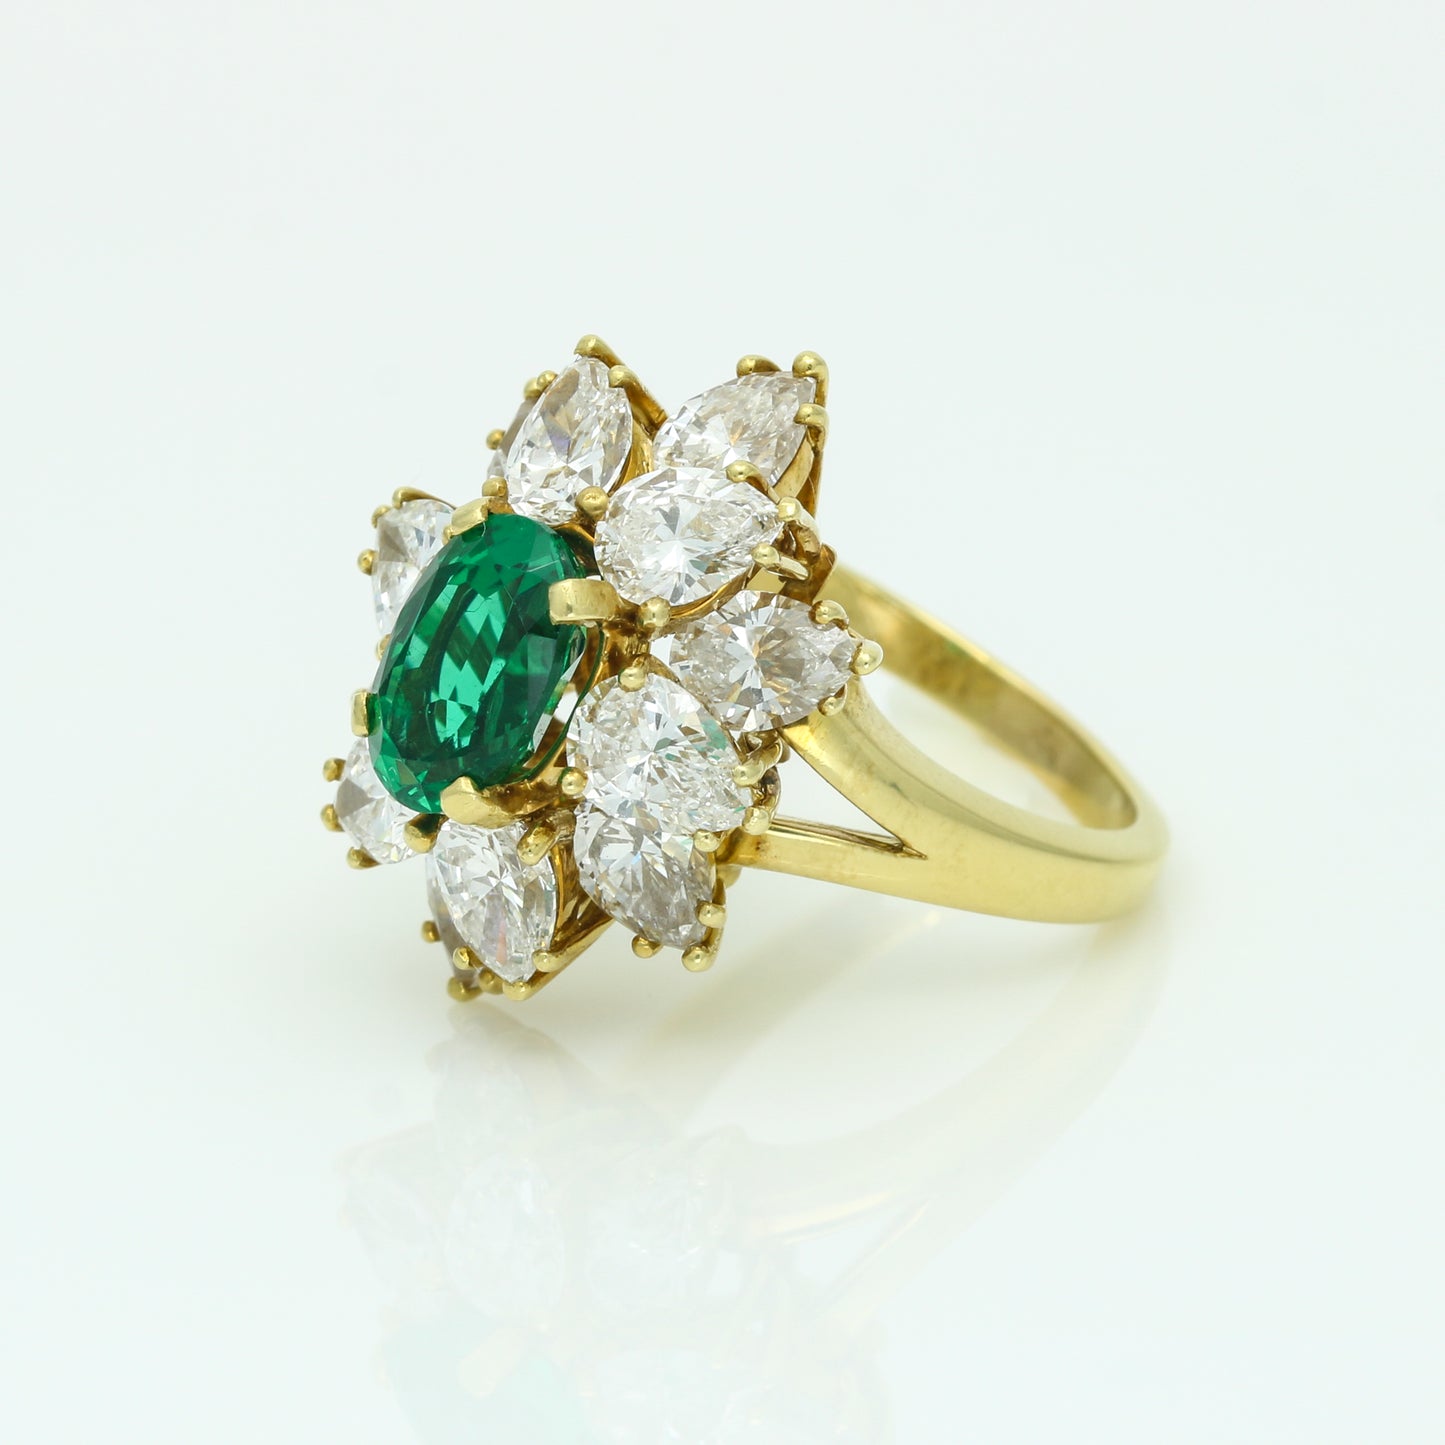 GIA Certified 1.77ct Emerald Diamond Statement Ring in 18k Yellow Gold